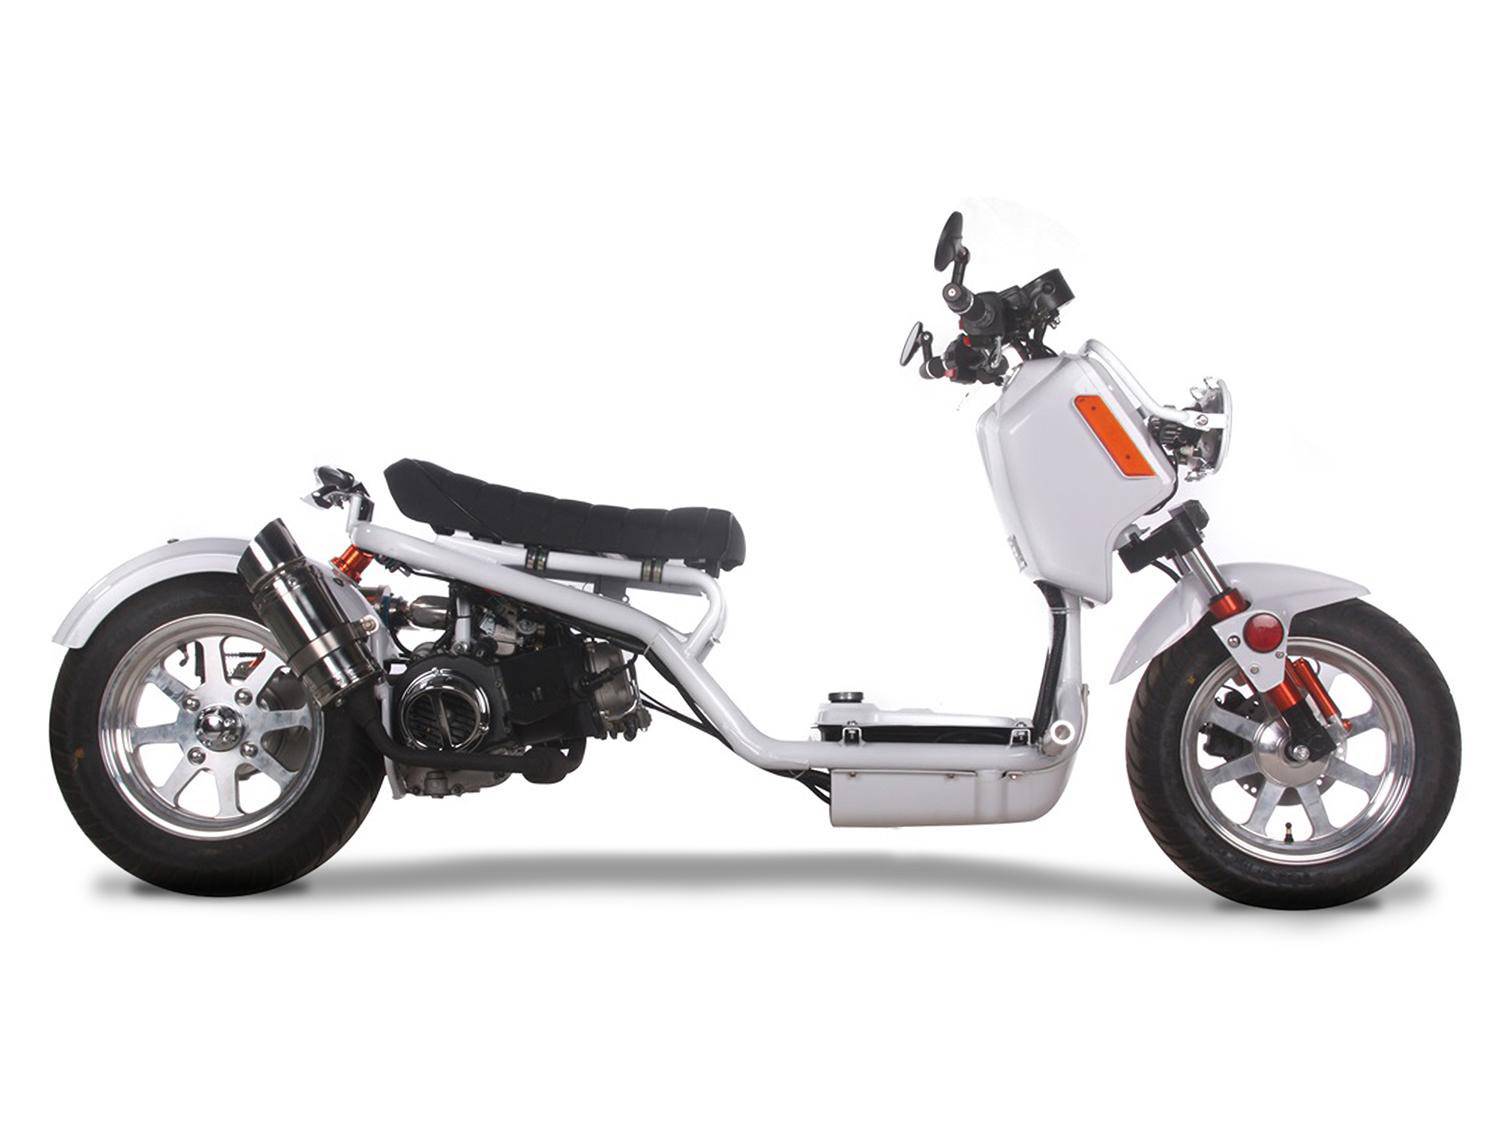 New 2020 Icebear Maddog 150 | Scooters in Largo FL | White